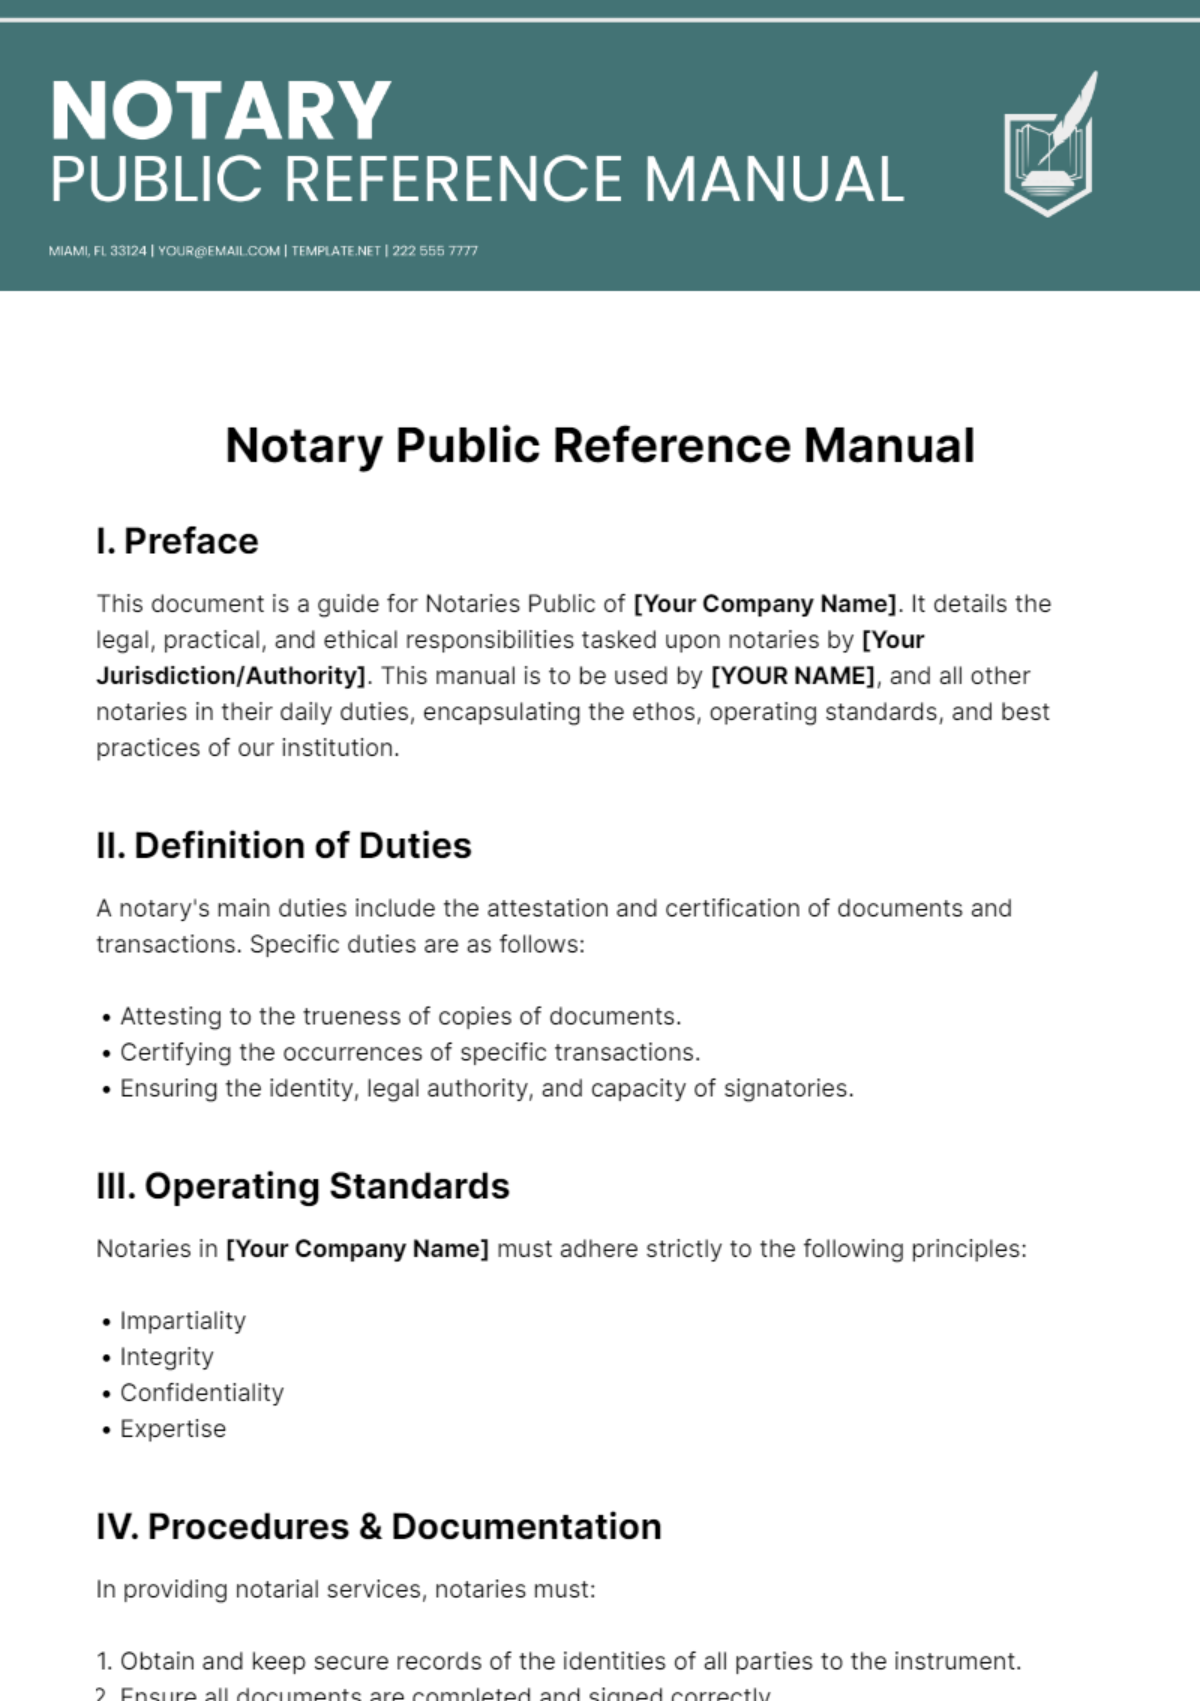 Notary Public Reference Manual Template